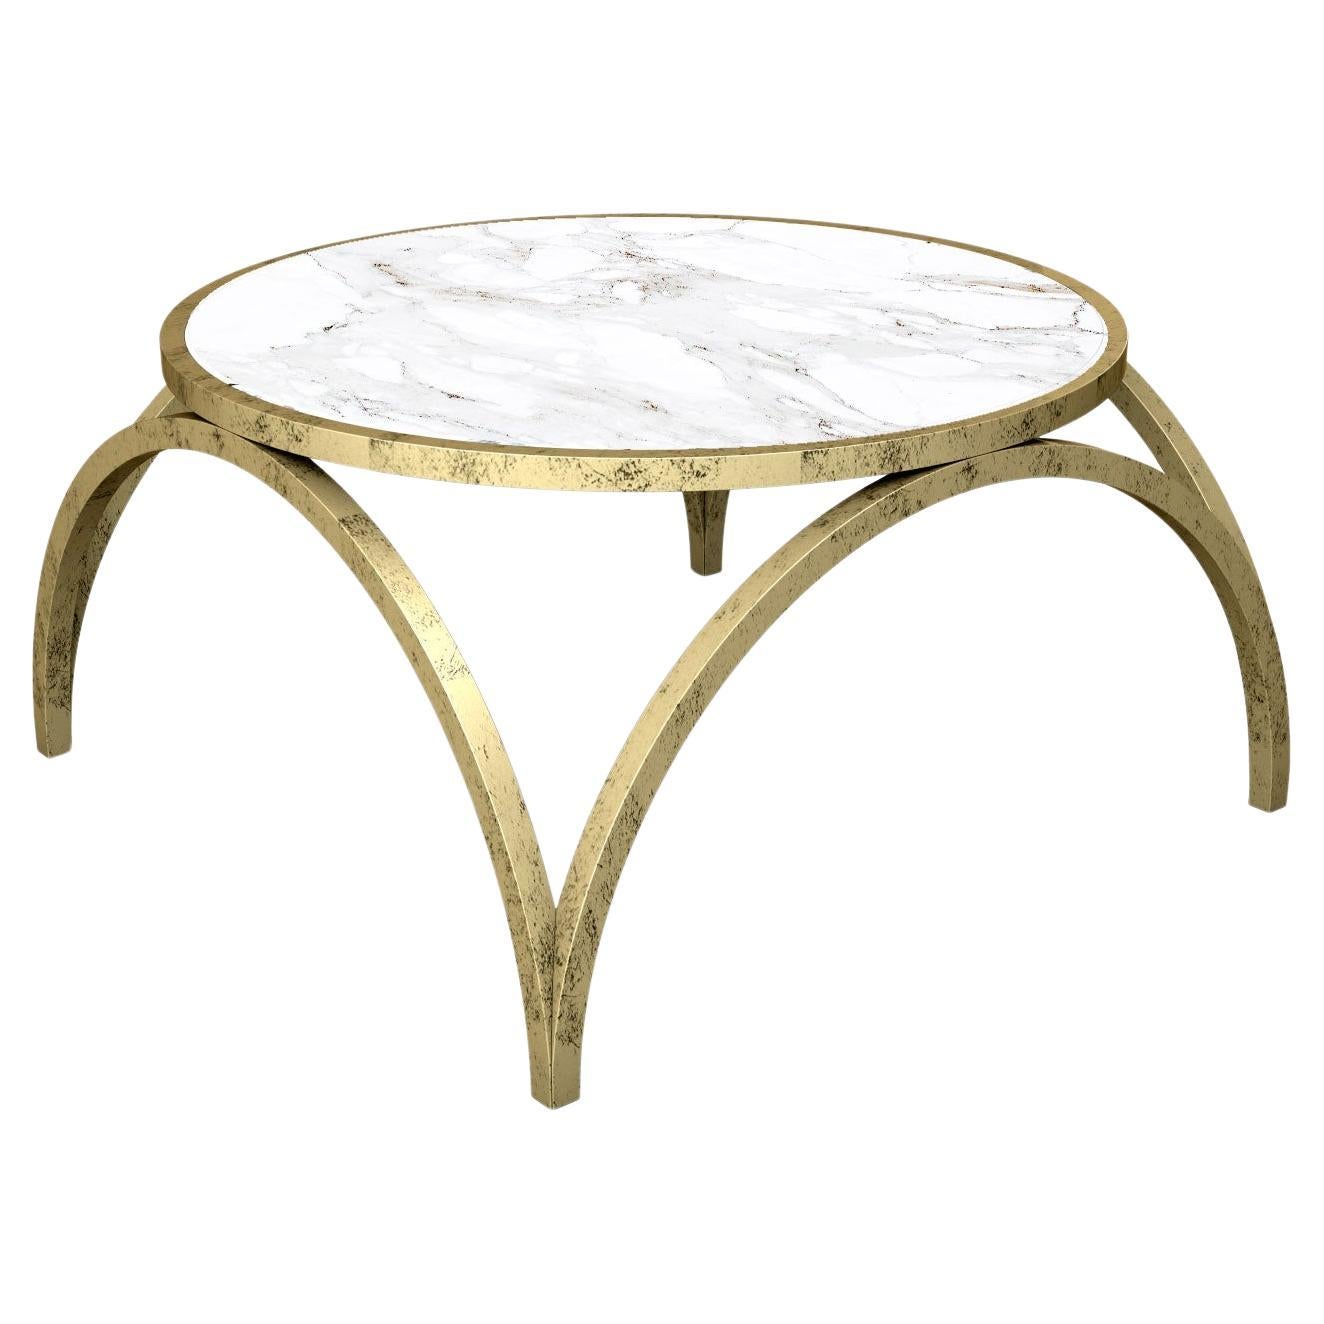 Crescent Medium Coffe Table - Modern Brass Coffee Table For Sale